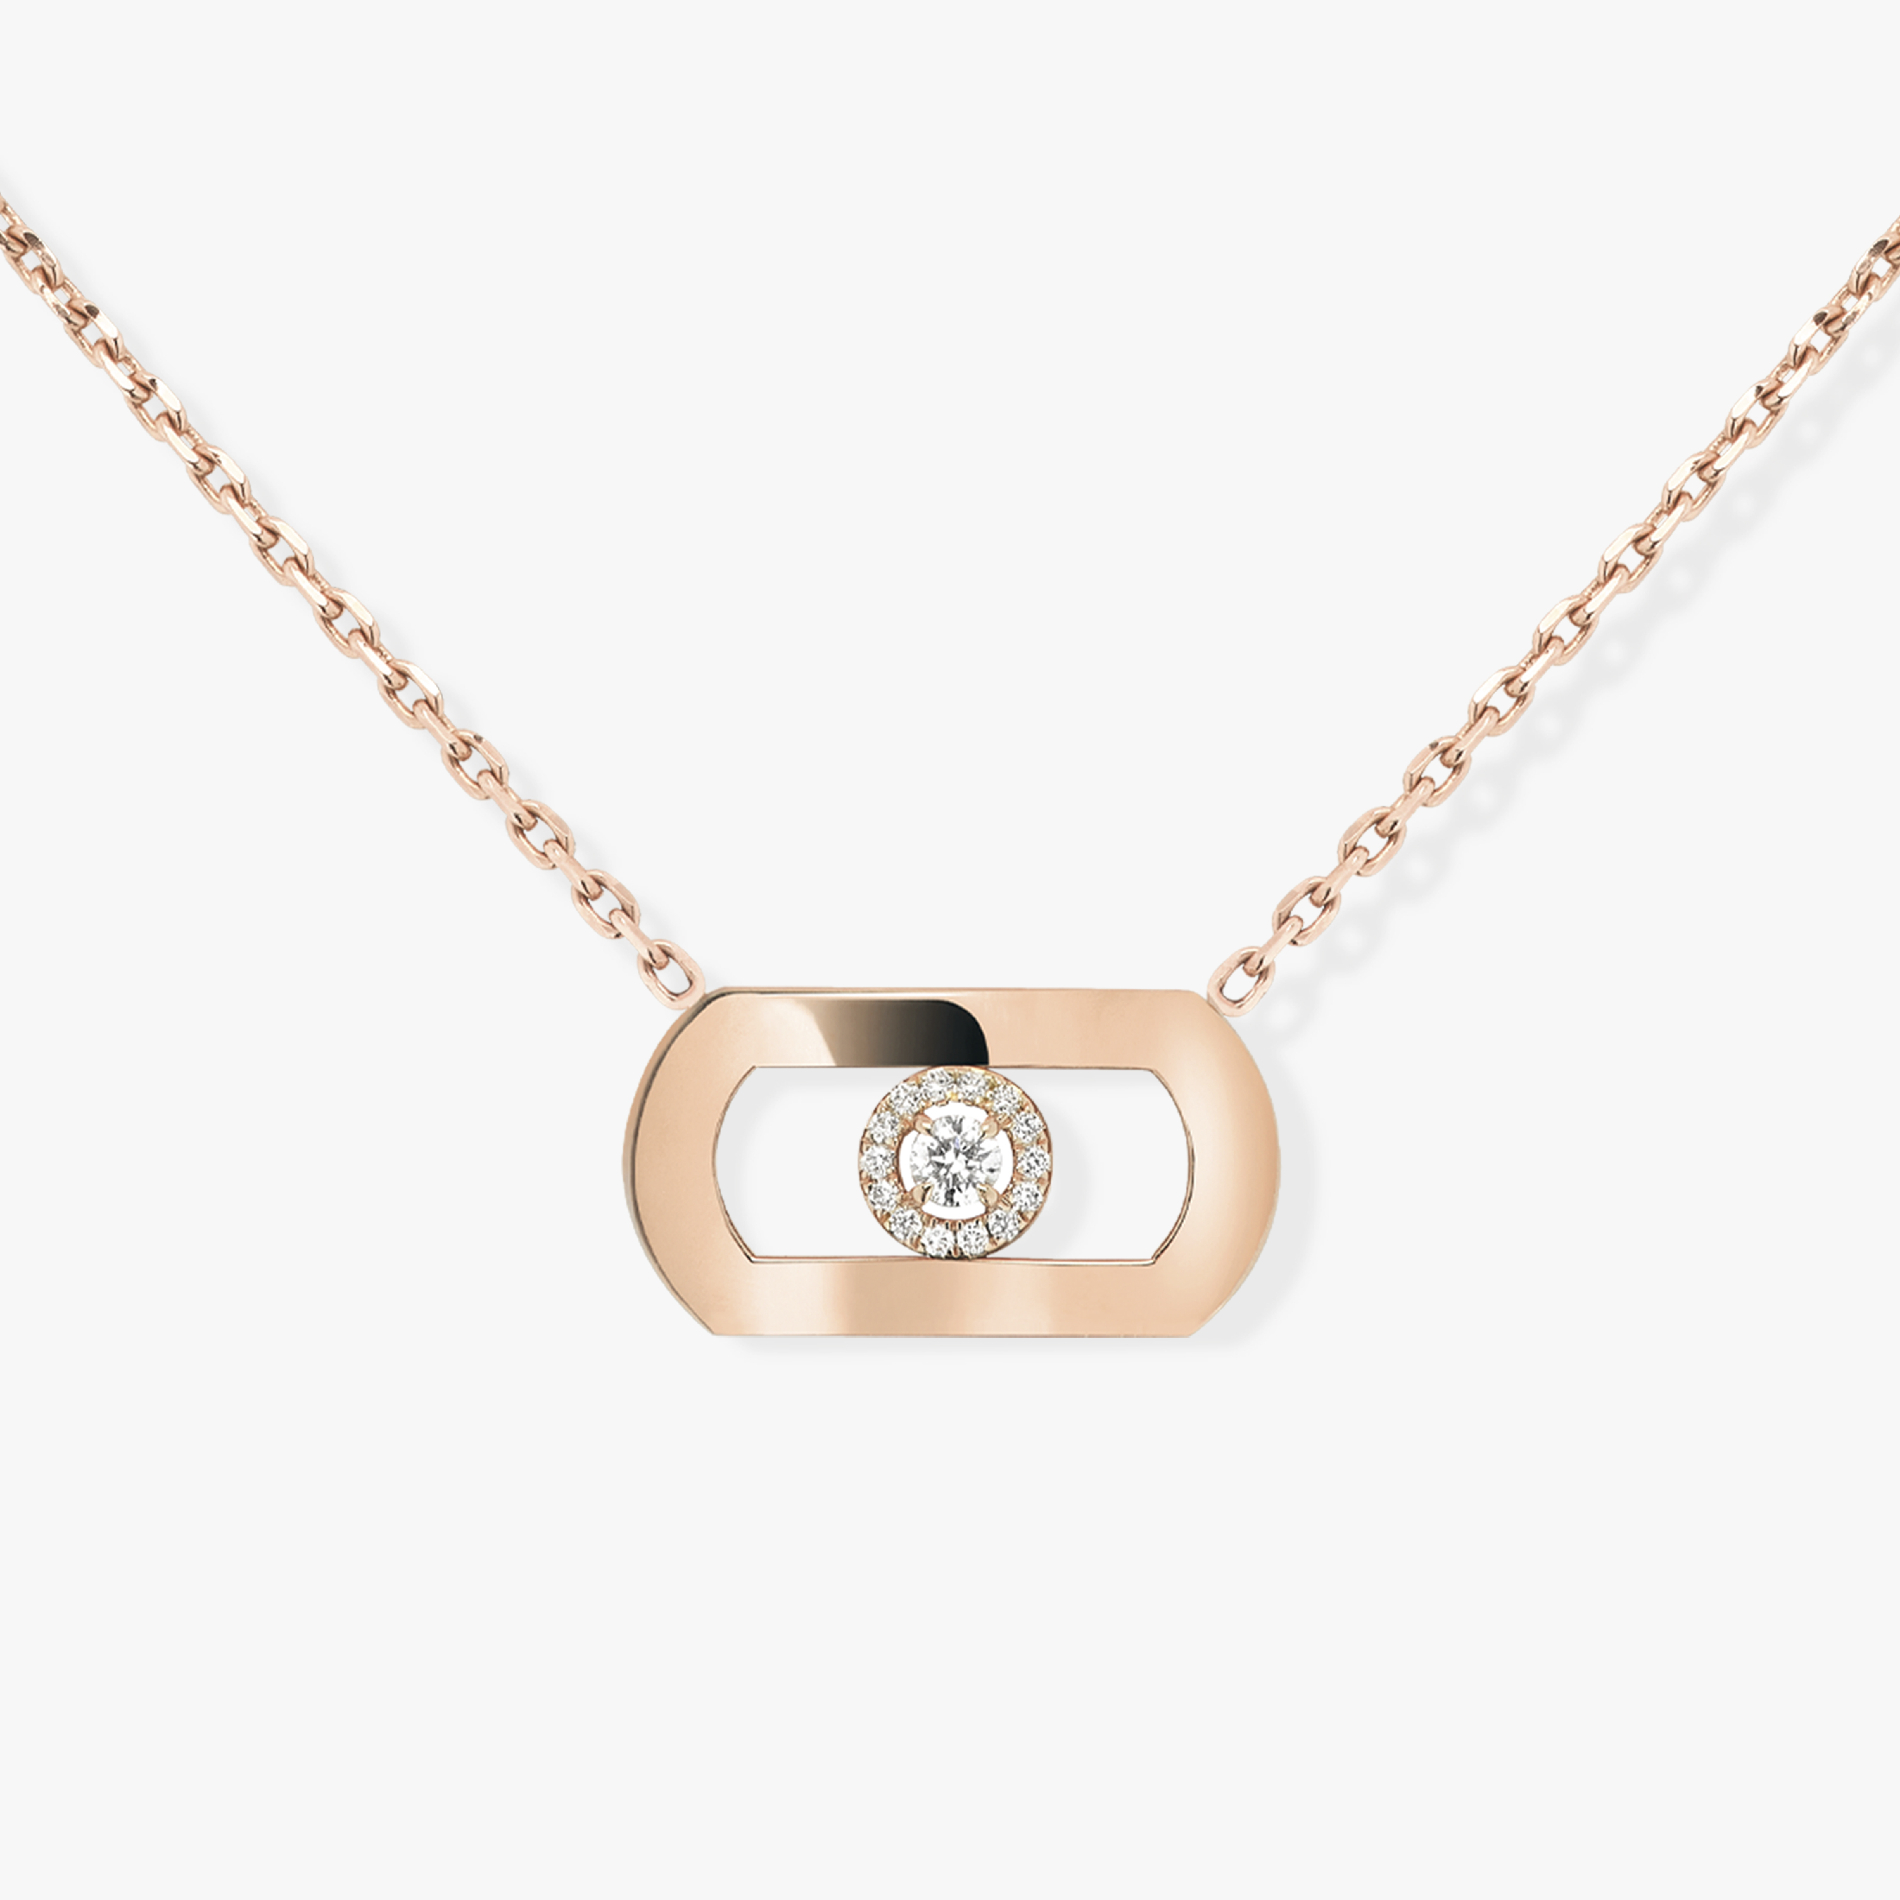 Necklace For Her Pink Gold Diamond So Move 12944-PG